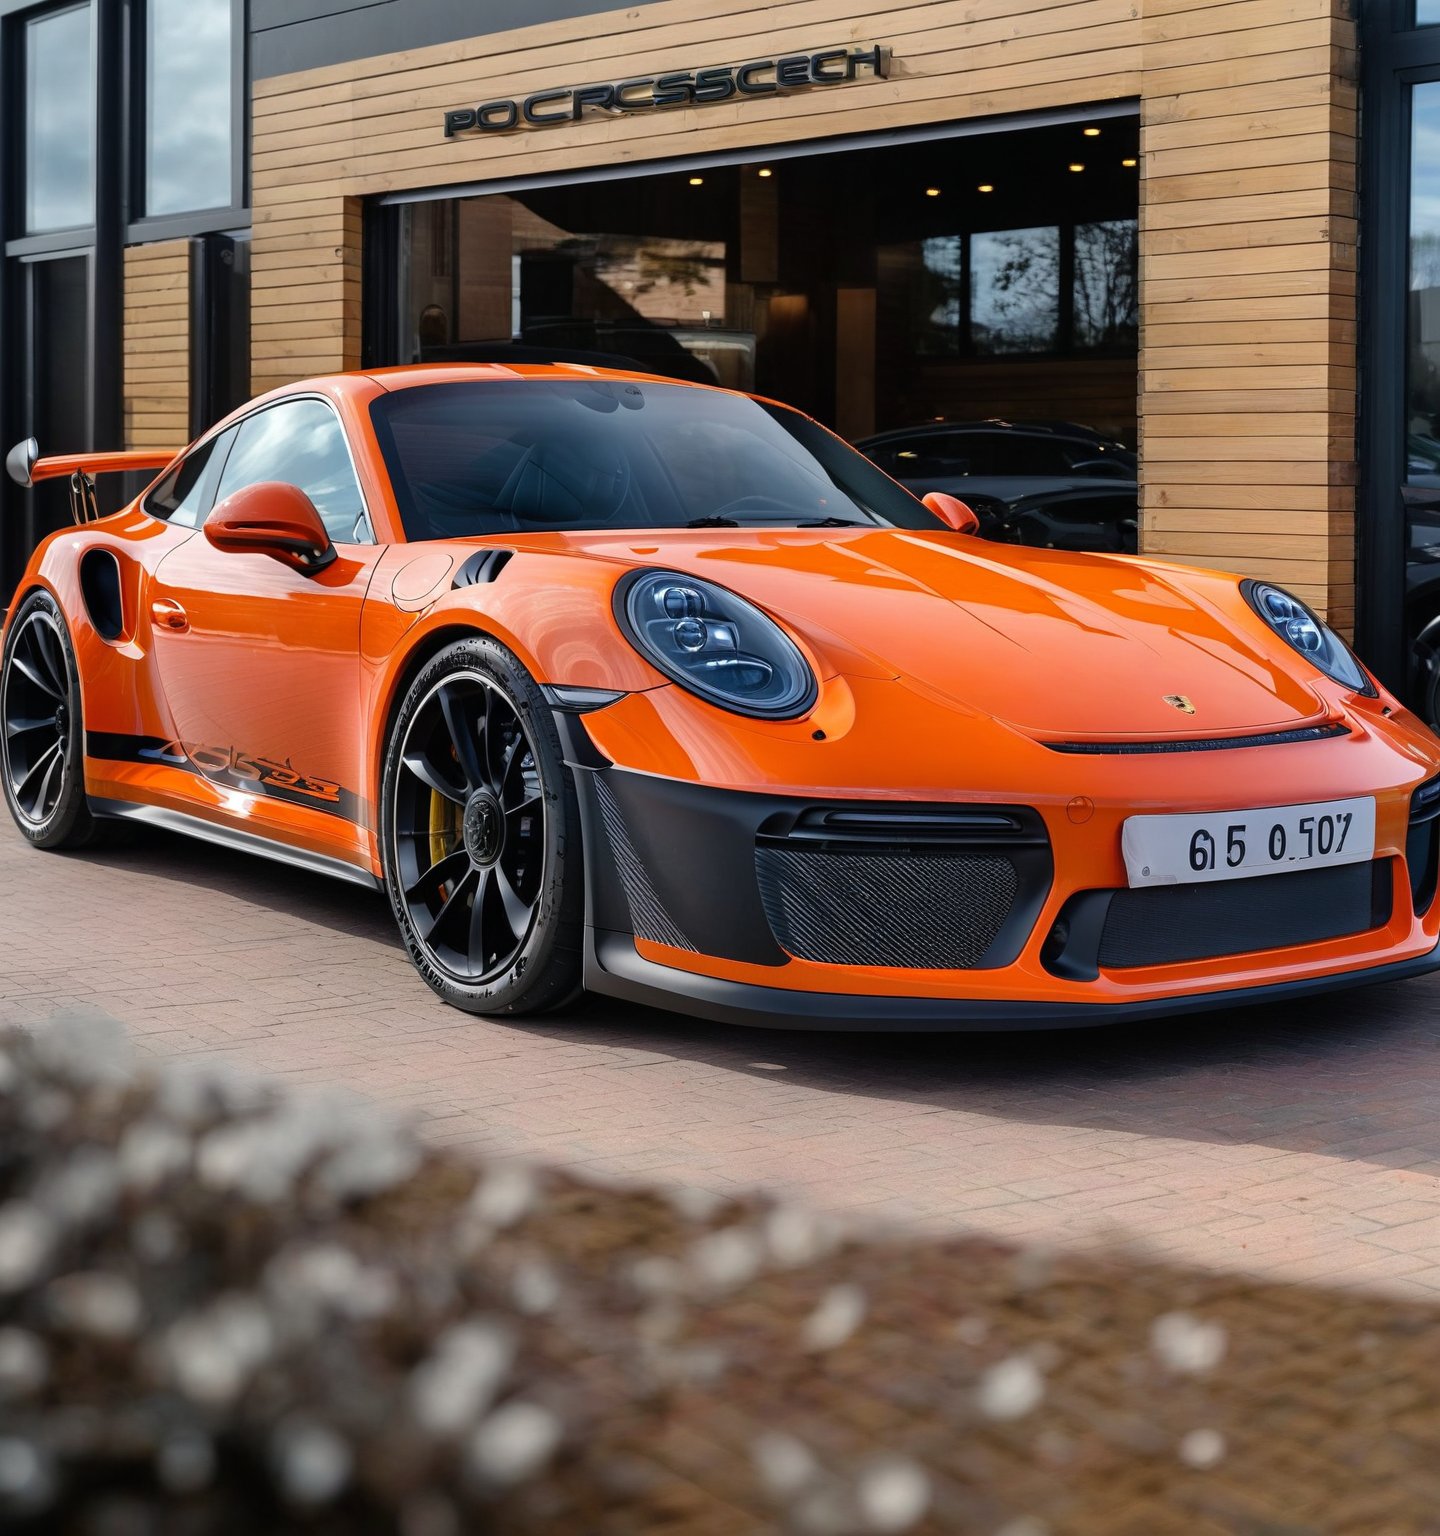 A Porsche 911 painted in ((Orange)) parked outside a luxury showroom, on a sunny day, perfect wheels, ((Full Vehicle image)), high resoution image, 8K, ,Porsche